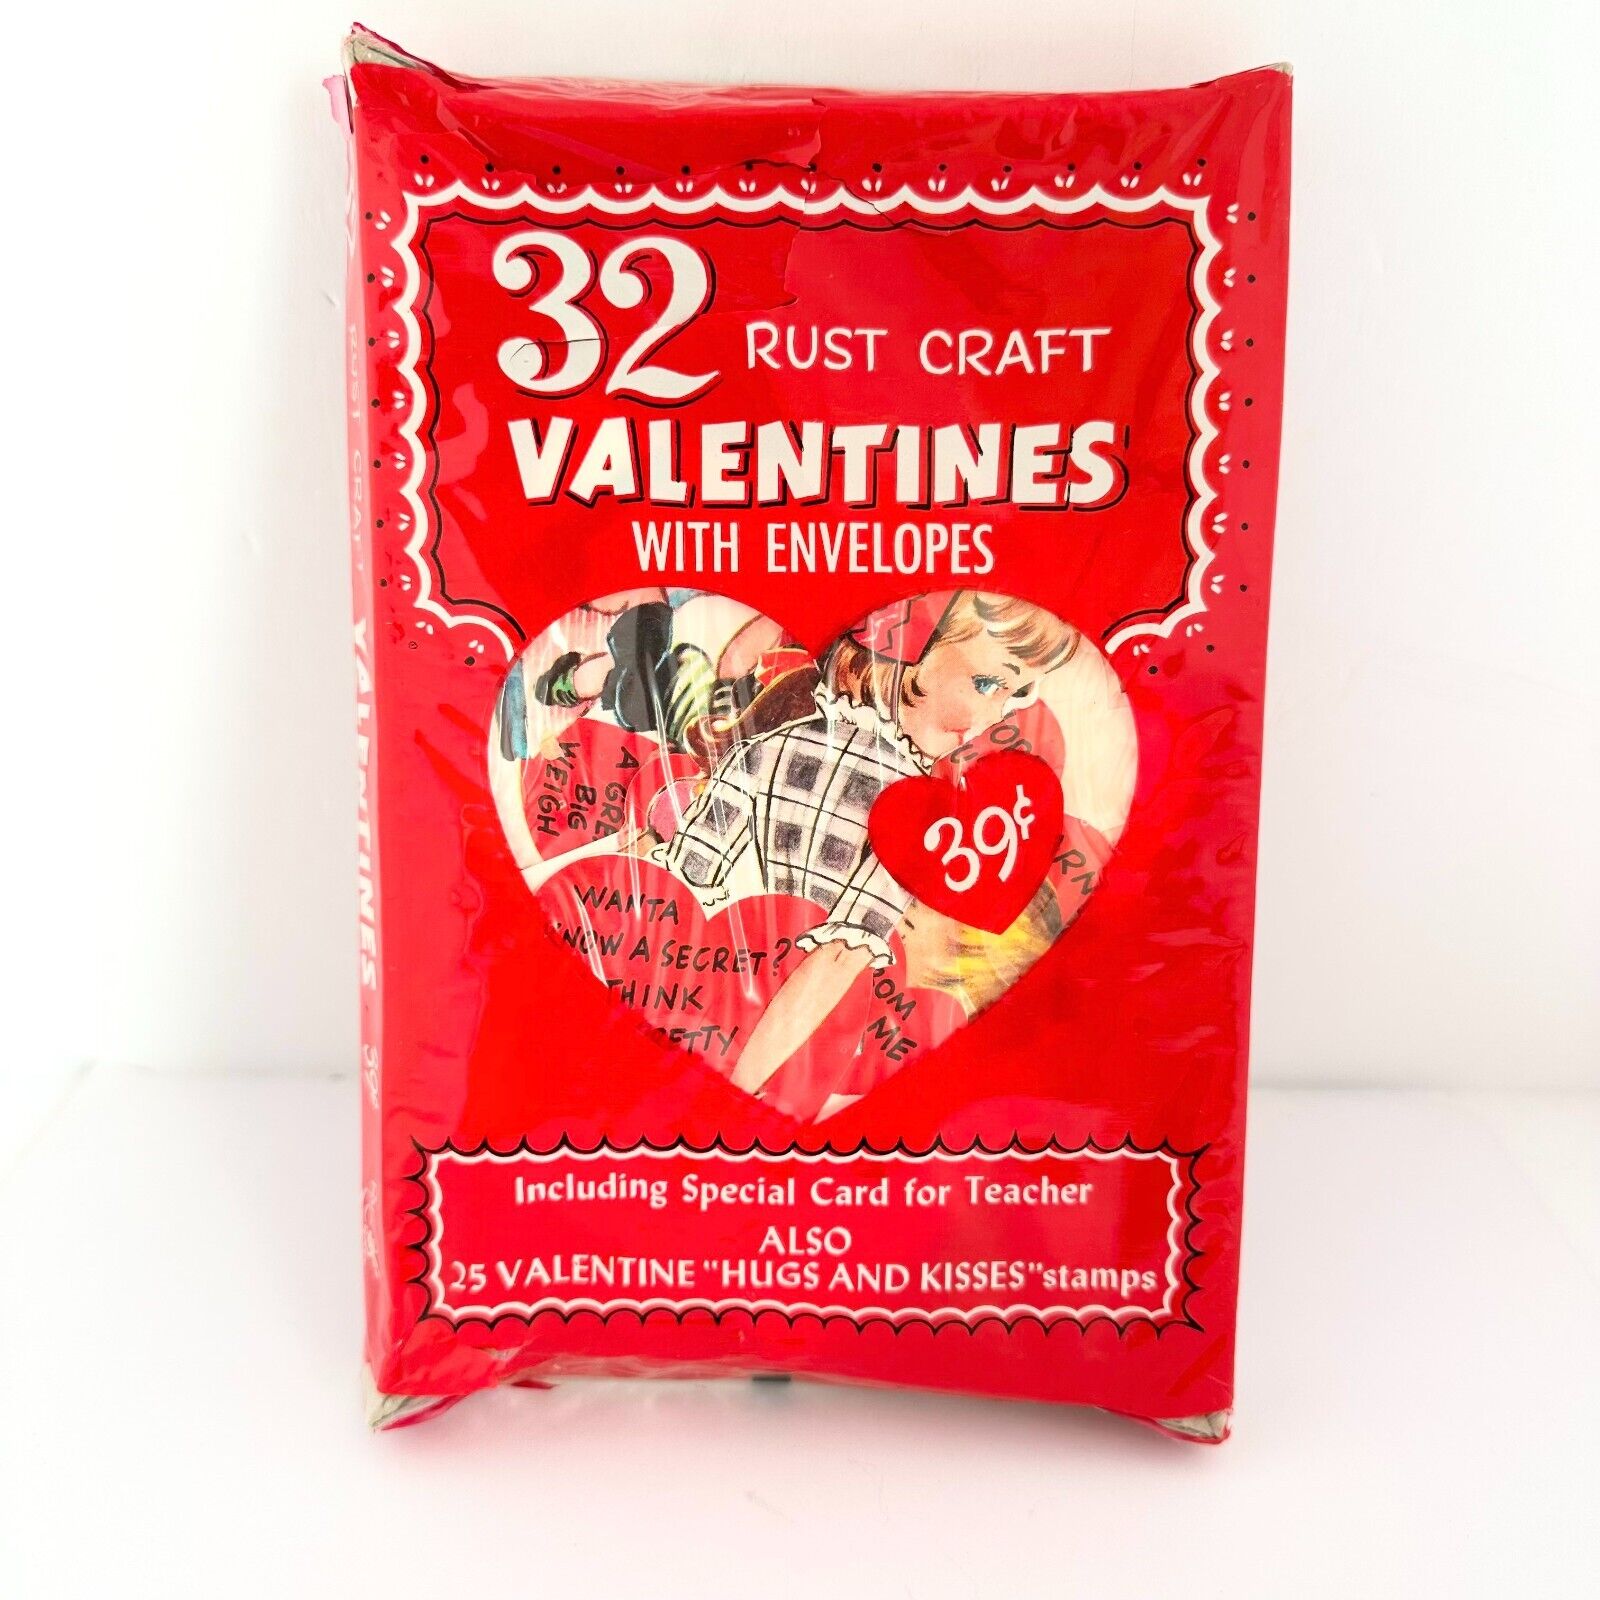 Rust Craft Box of 32 Valentines w/Envelopes Vintage New Old Stock Unopened